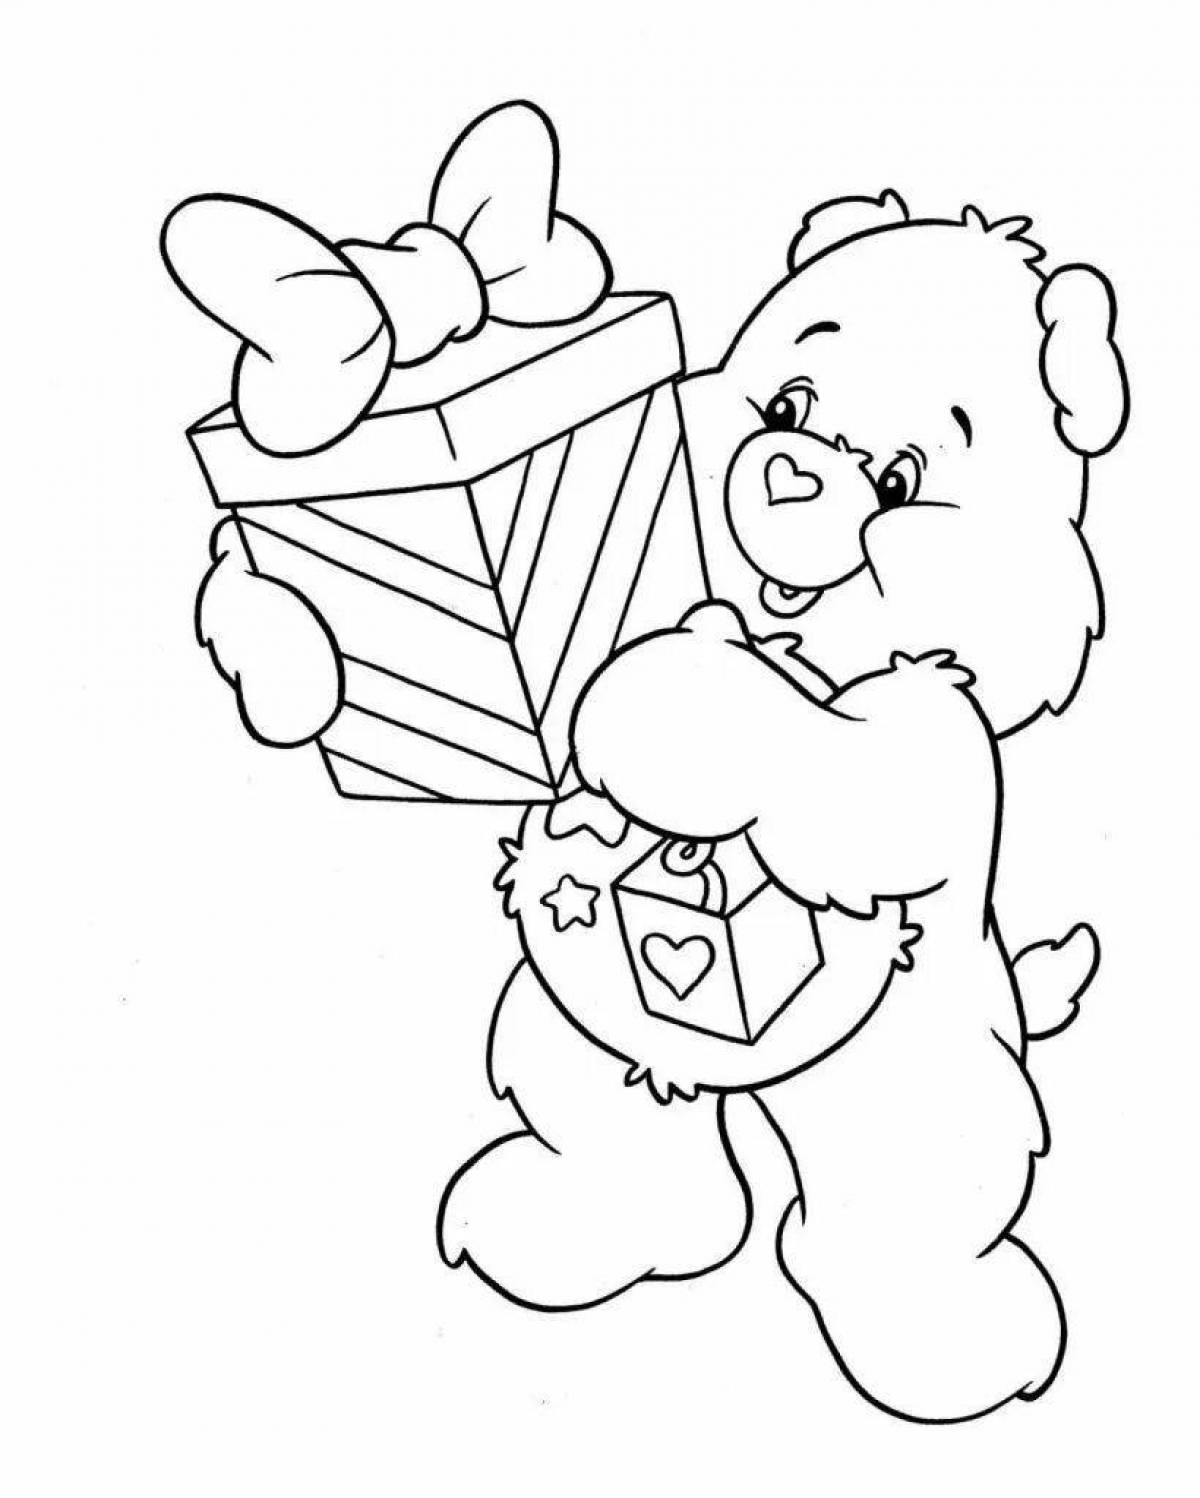 Coloring lively what the bear loves